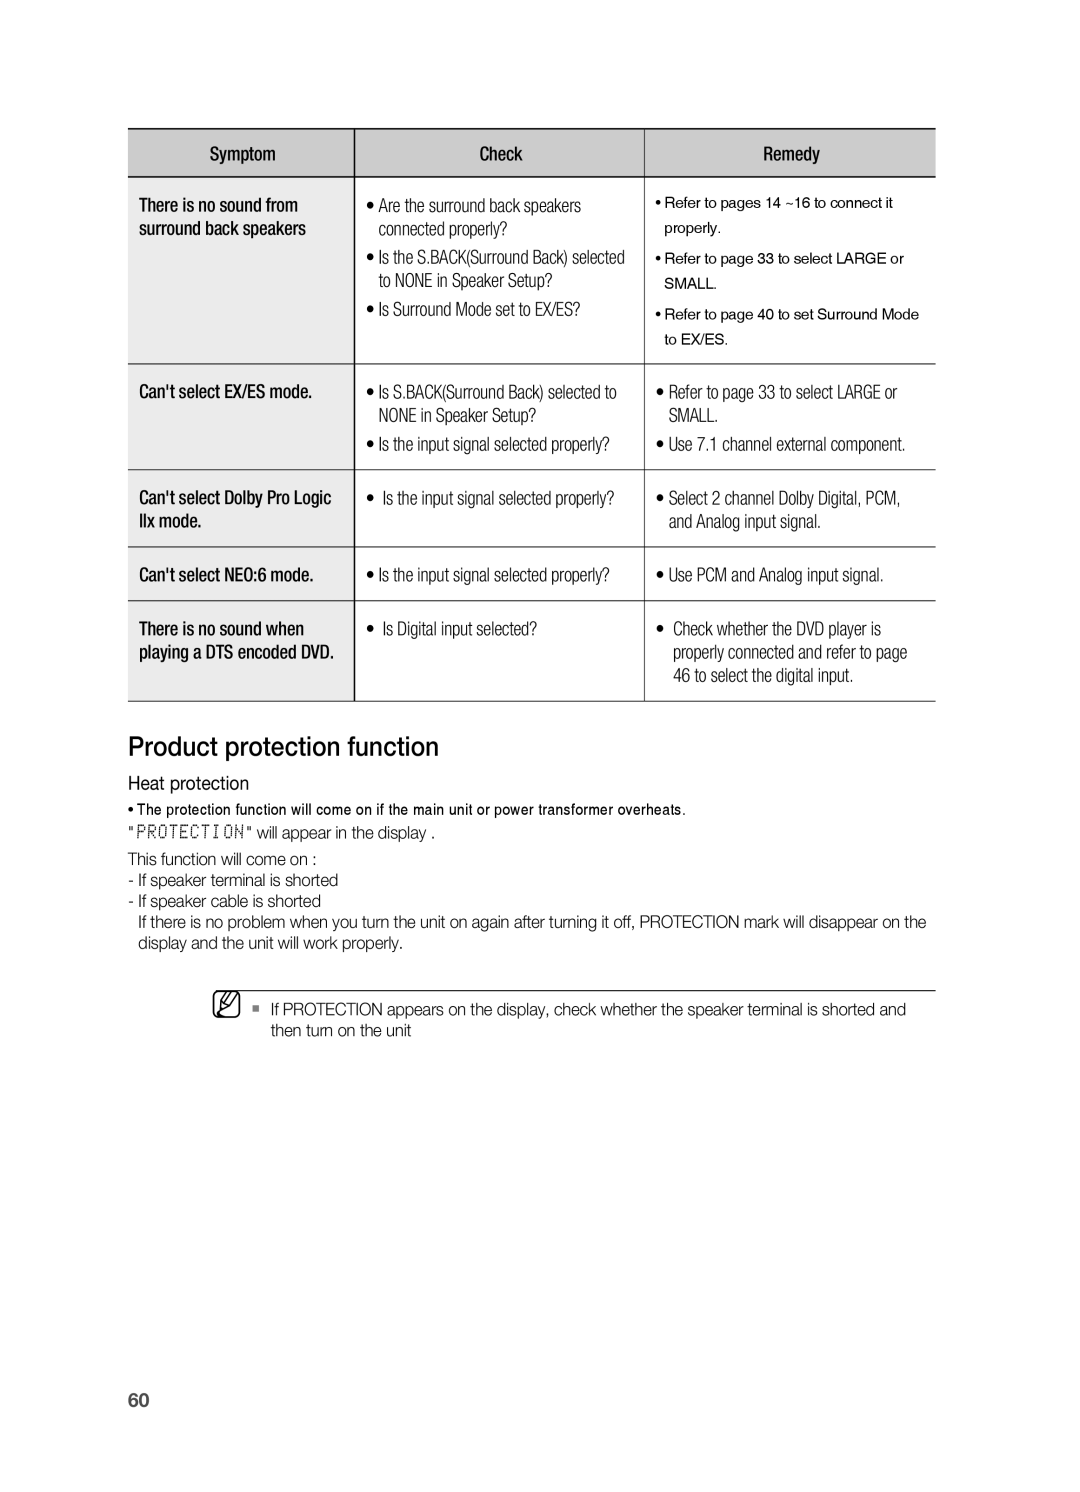 Samsung HT-AS730ST user manual Product protection function 